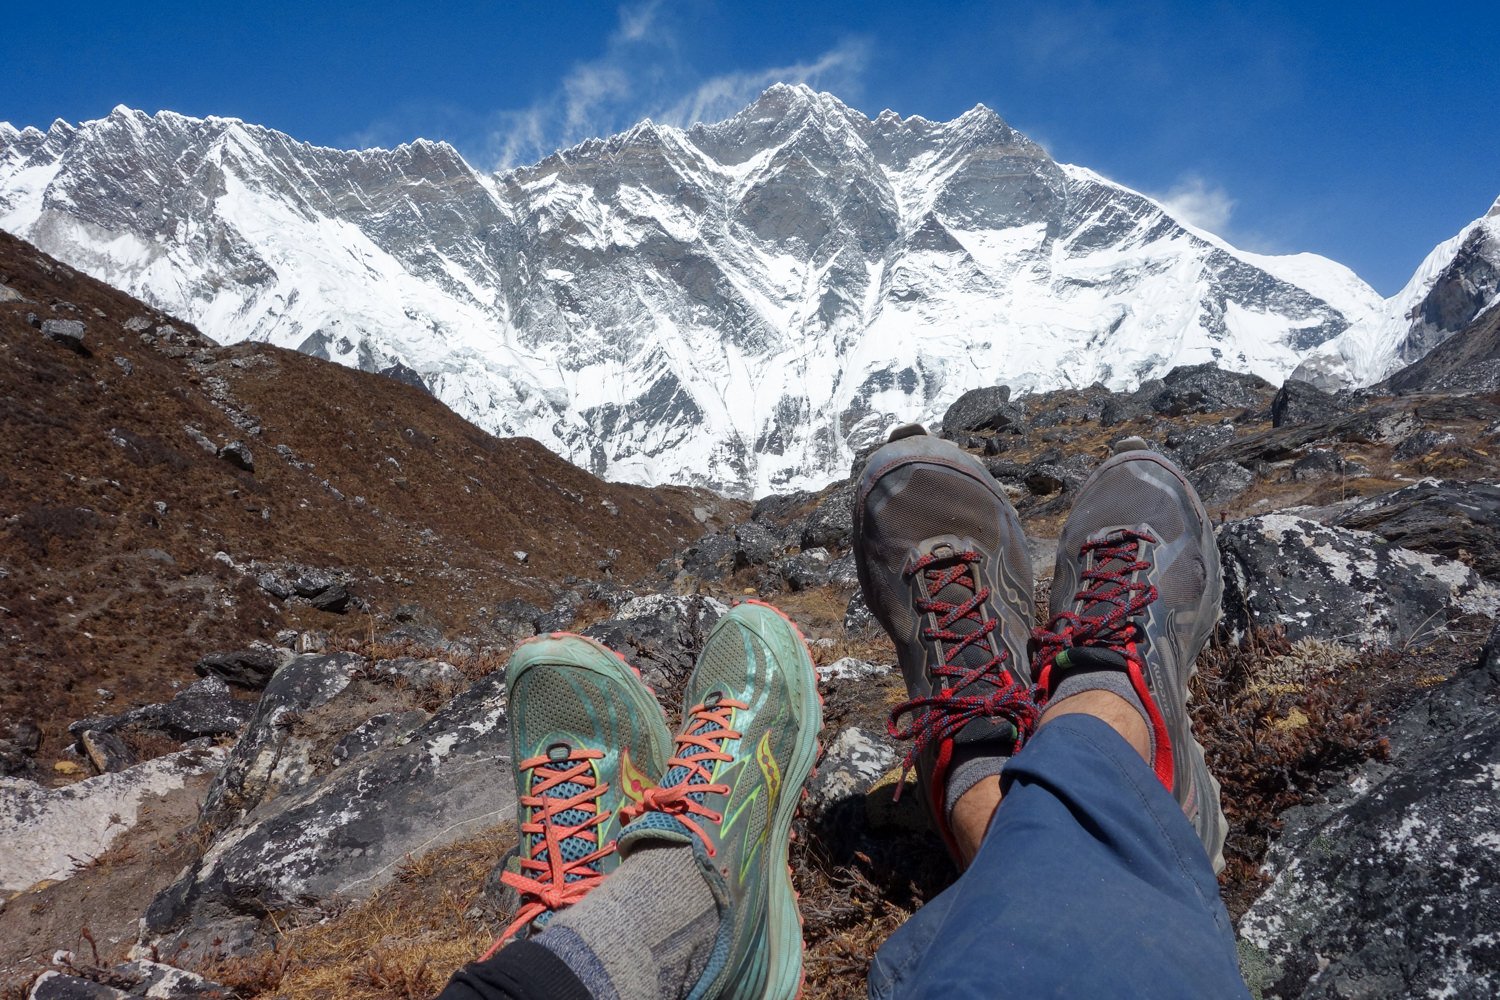 Two pairs of feet wearing Saucony Peregrine shoes in front of a mountain view